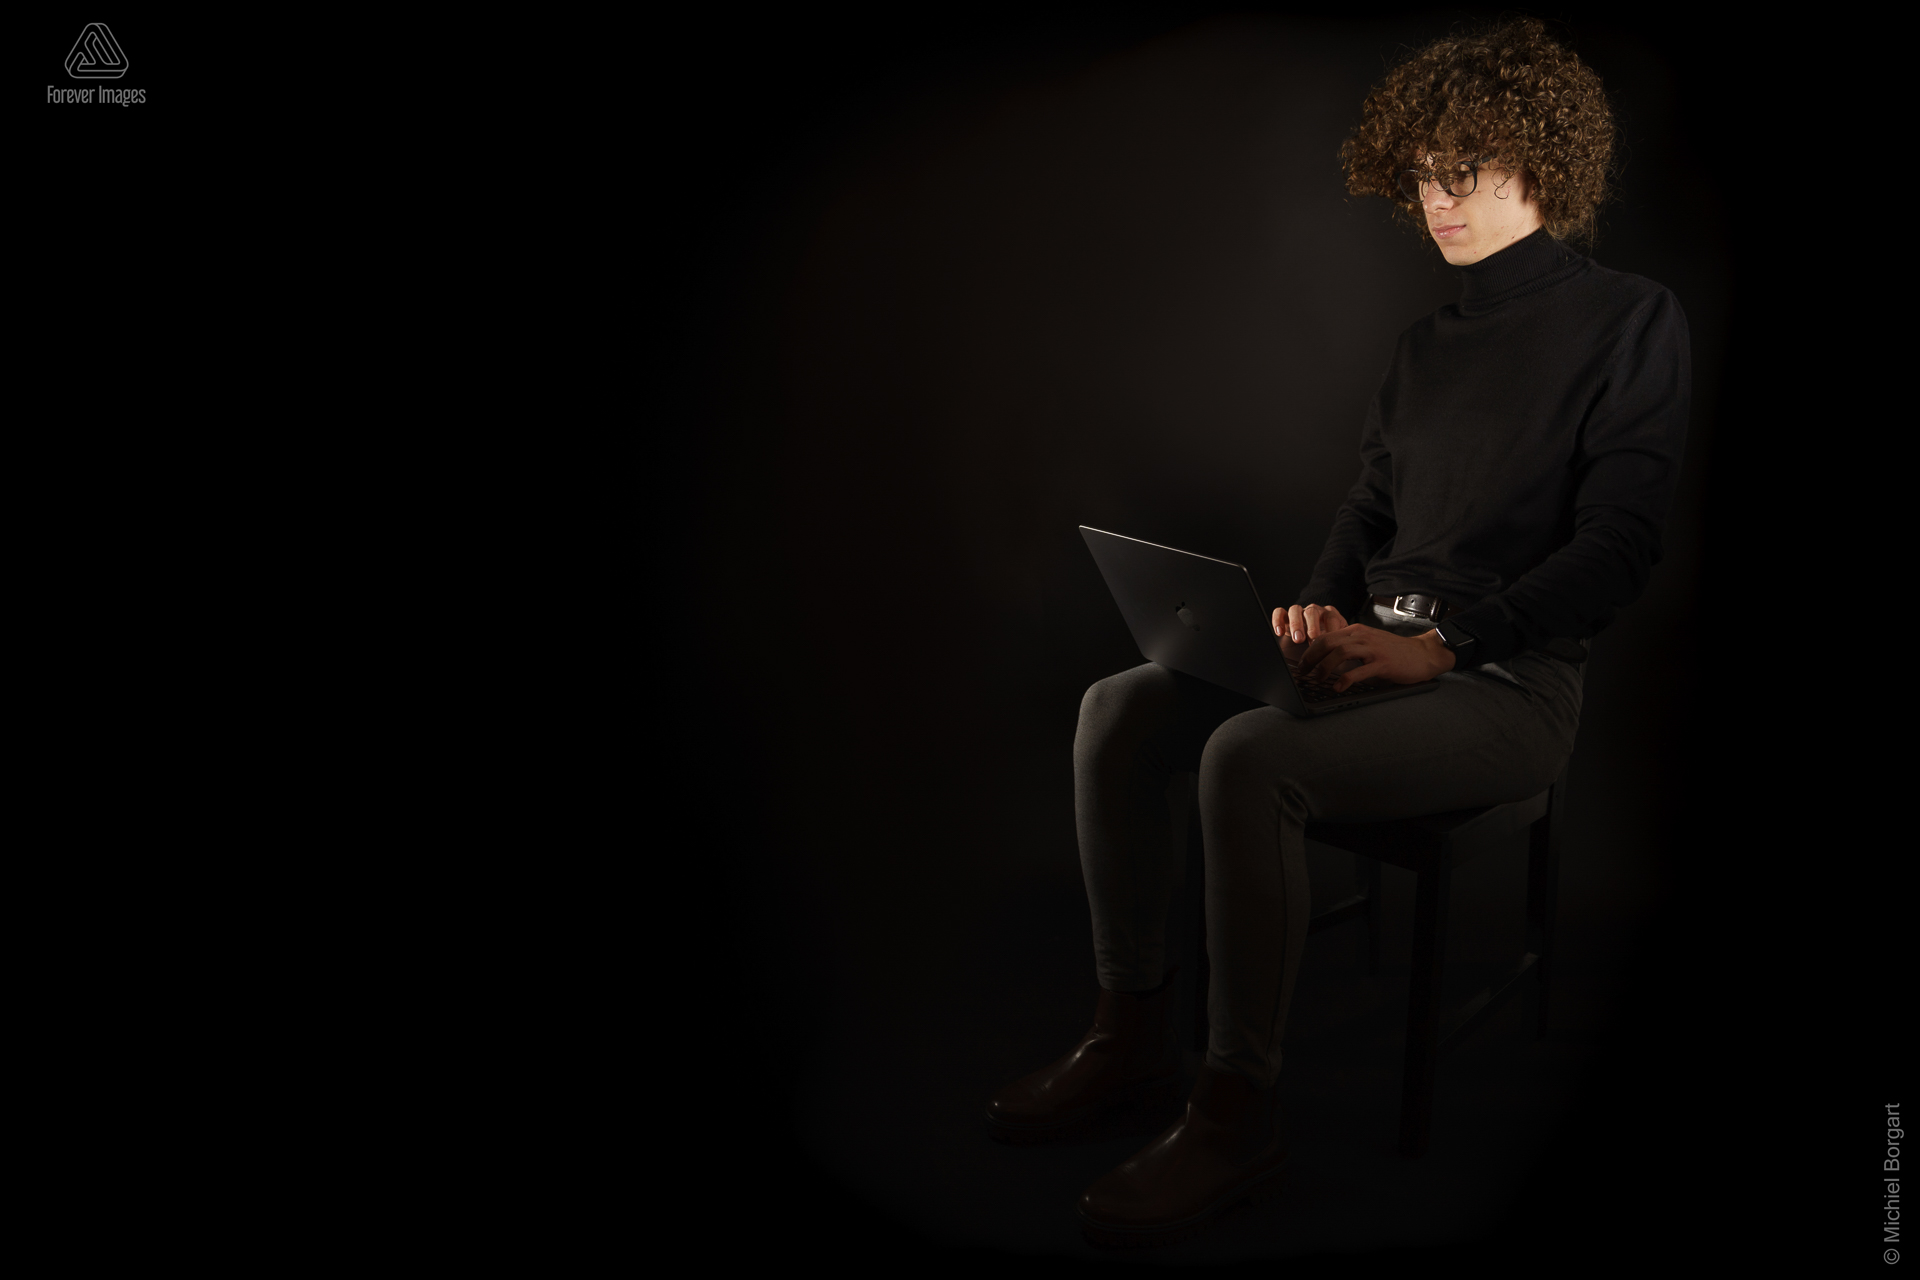 Portrait photo young man with black turtleneck long curly hair with laptop | Andreas | Portrait Photographer Michiel Borgart - Forever Images.